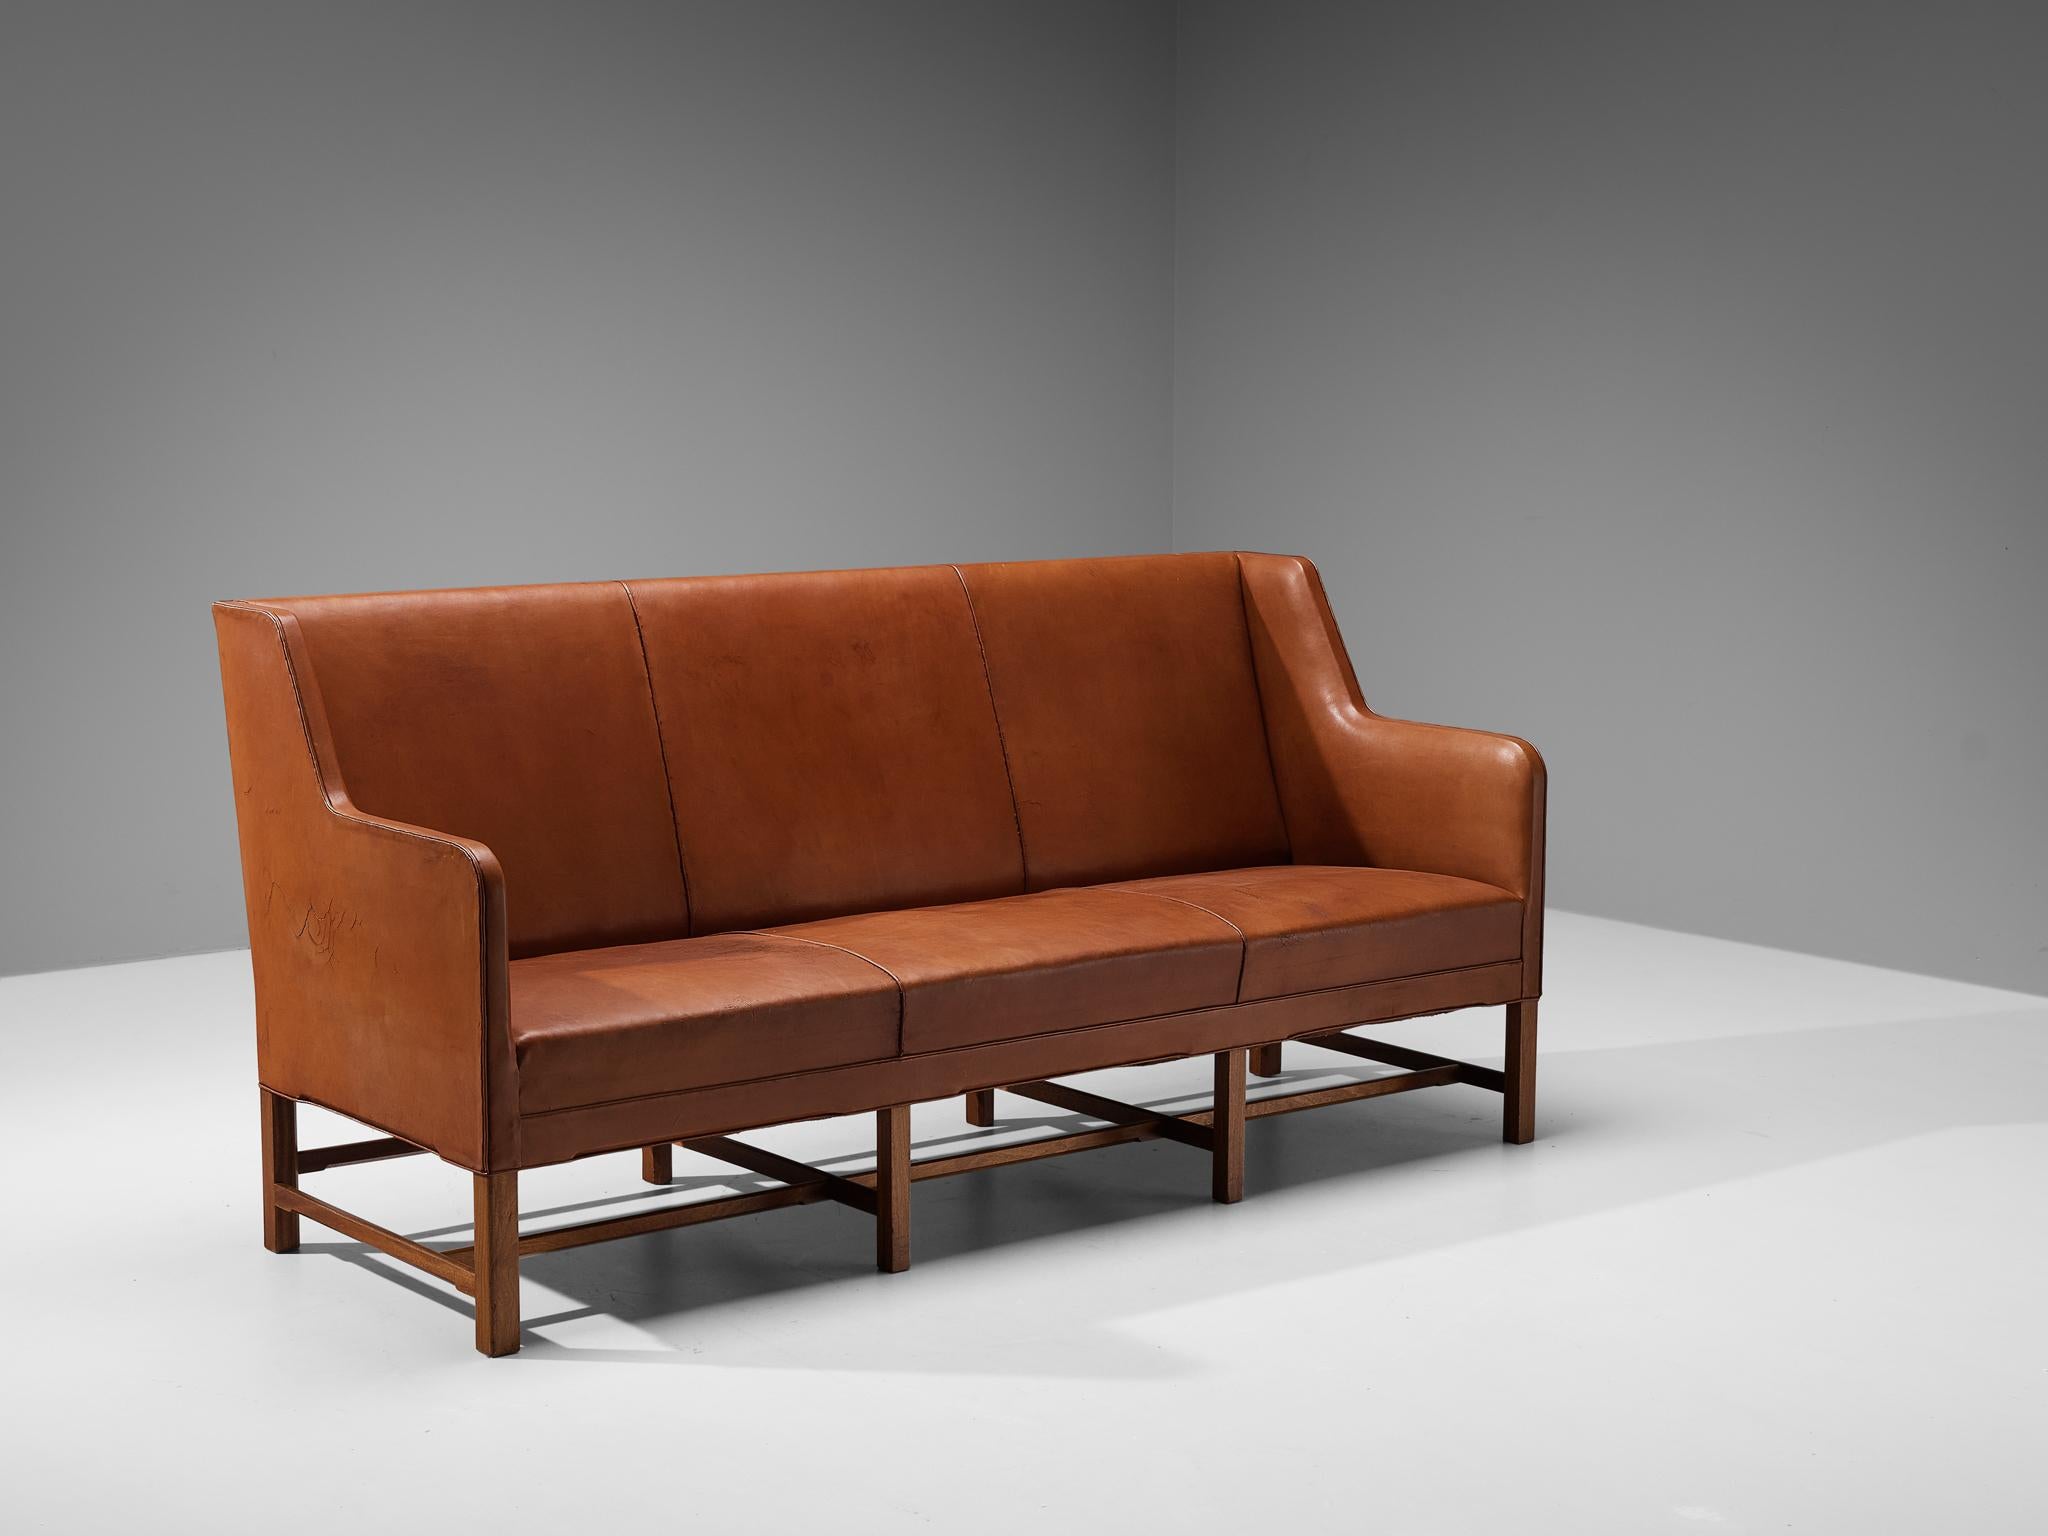 Kaare Klint for Rud Rasmussen, sofa model '5011', leather, wood, Denmark, design 1935.

Classic and elegant Scandinavian three-seat sofa by Kaare Klint designed in 1935. The high back is structured by vertical lines into three parts that flow over